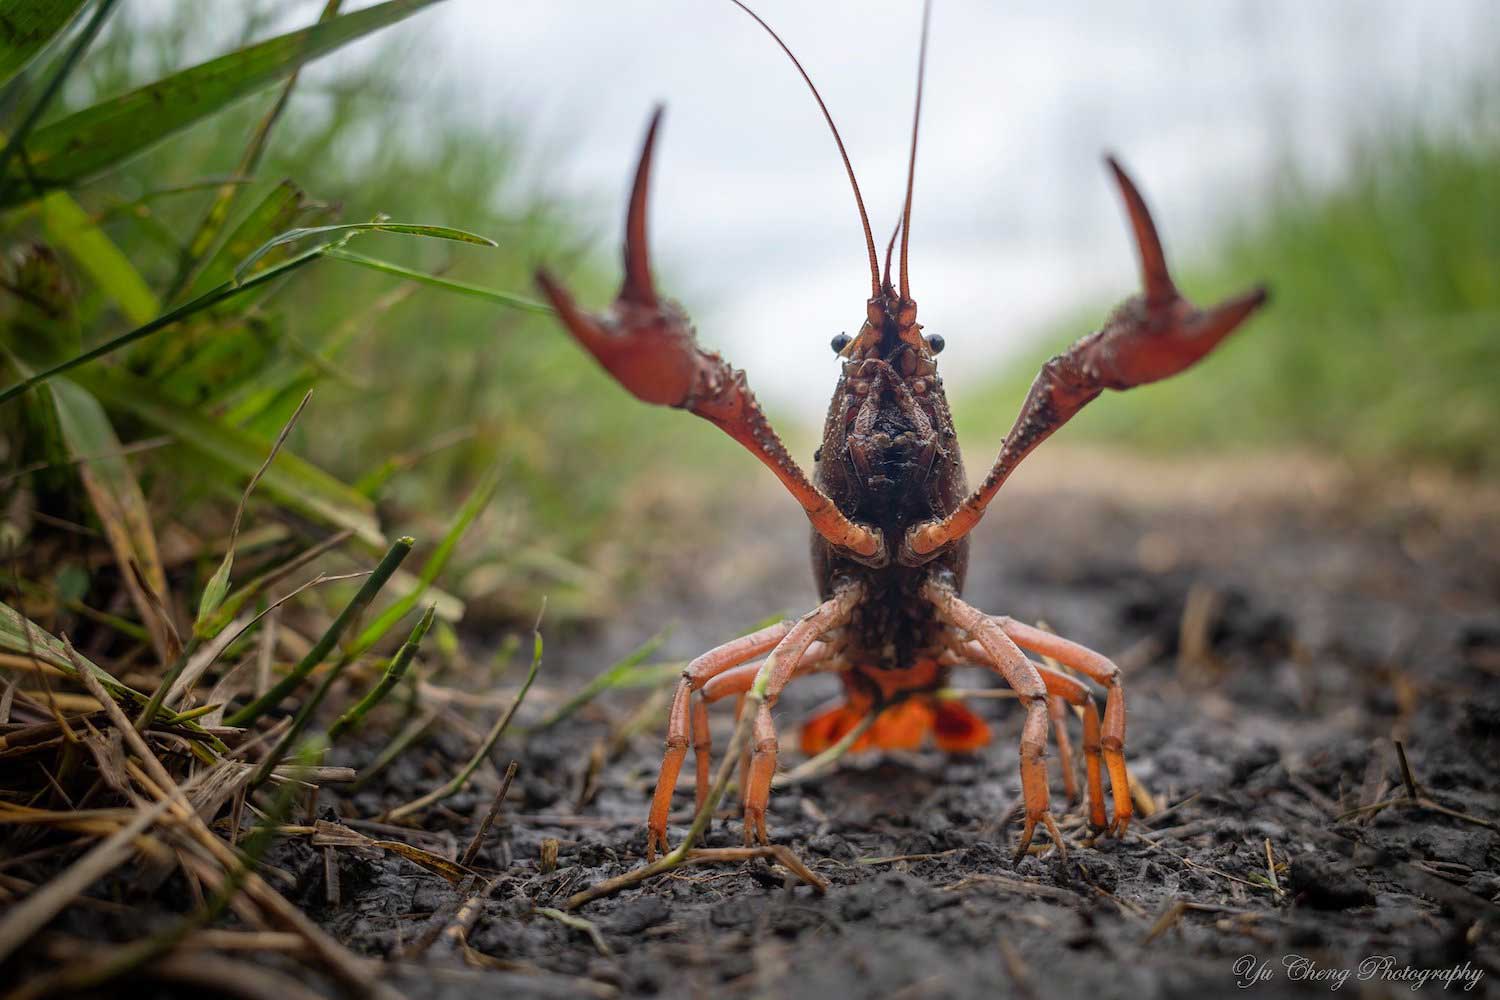 A crayfish standing with its front legs extended in the air.